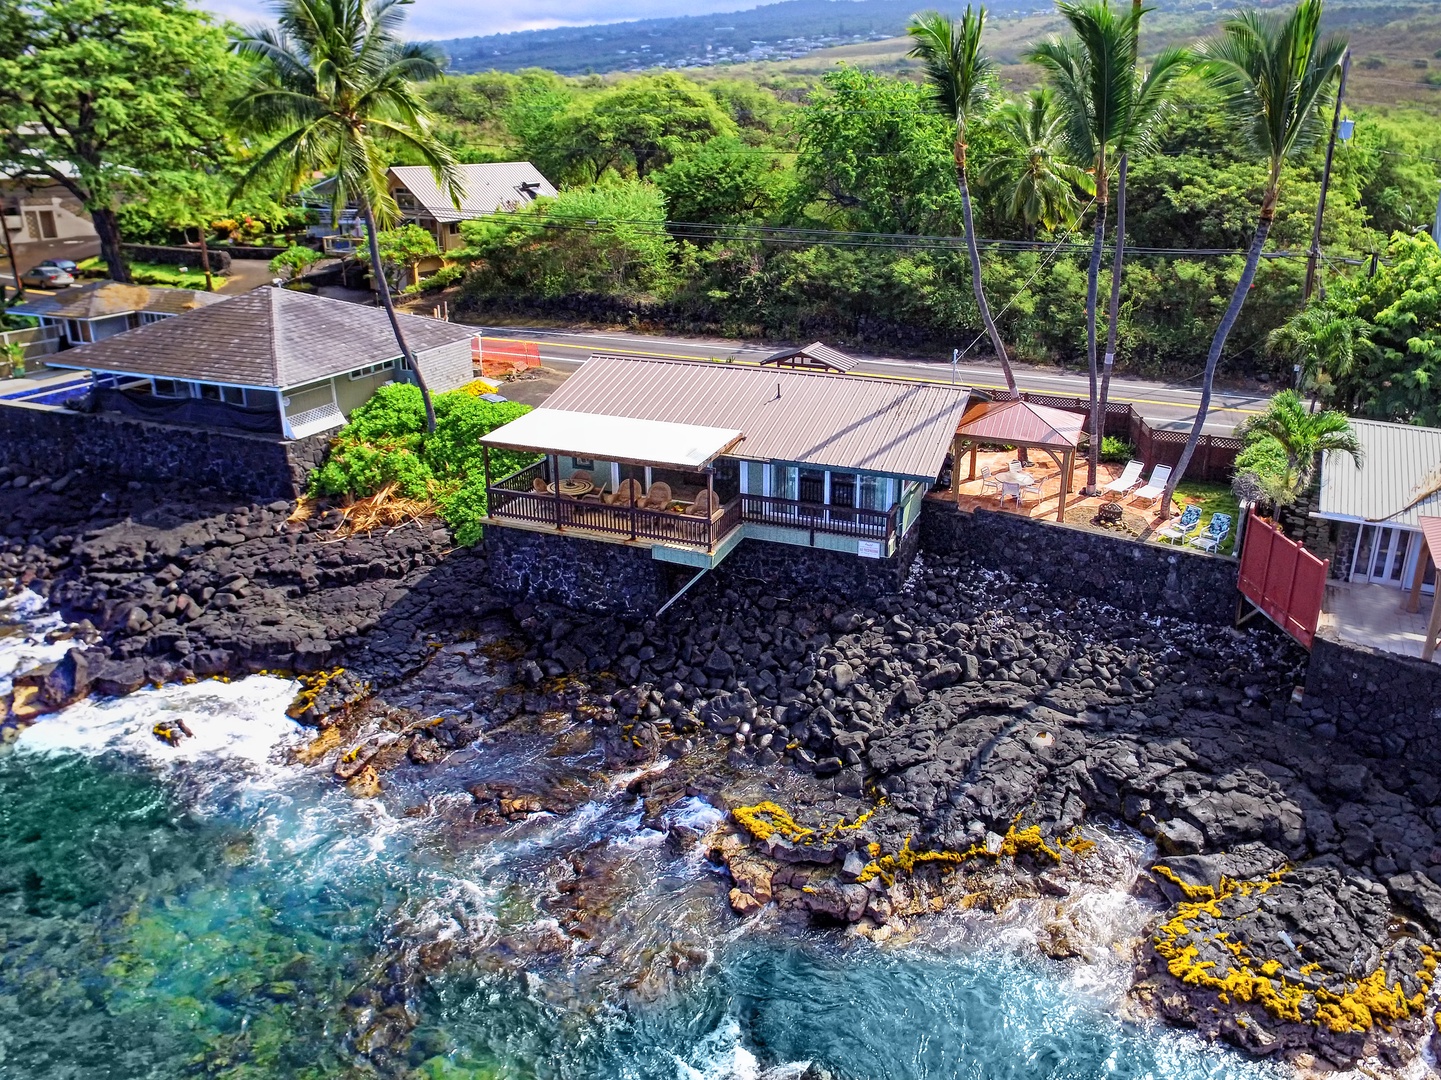 Kailua Kona Vacation Rentals, The Cottage - Aerial view of The Cottage